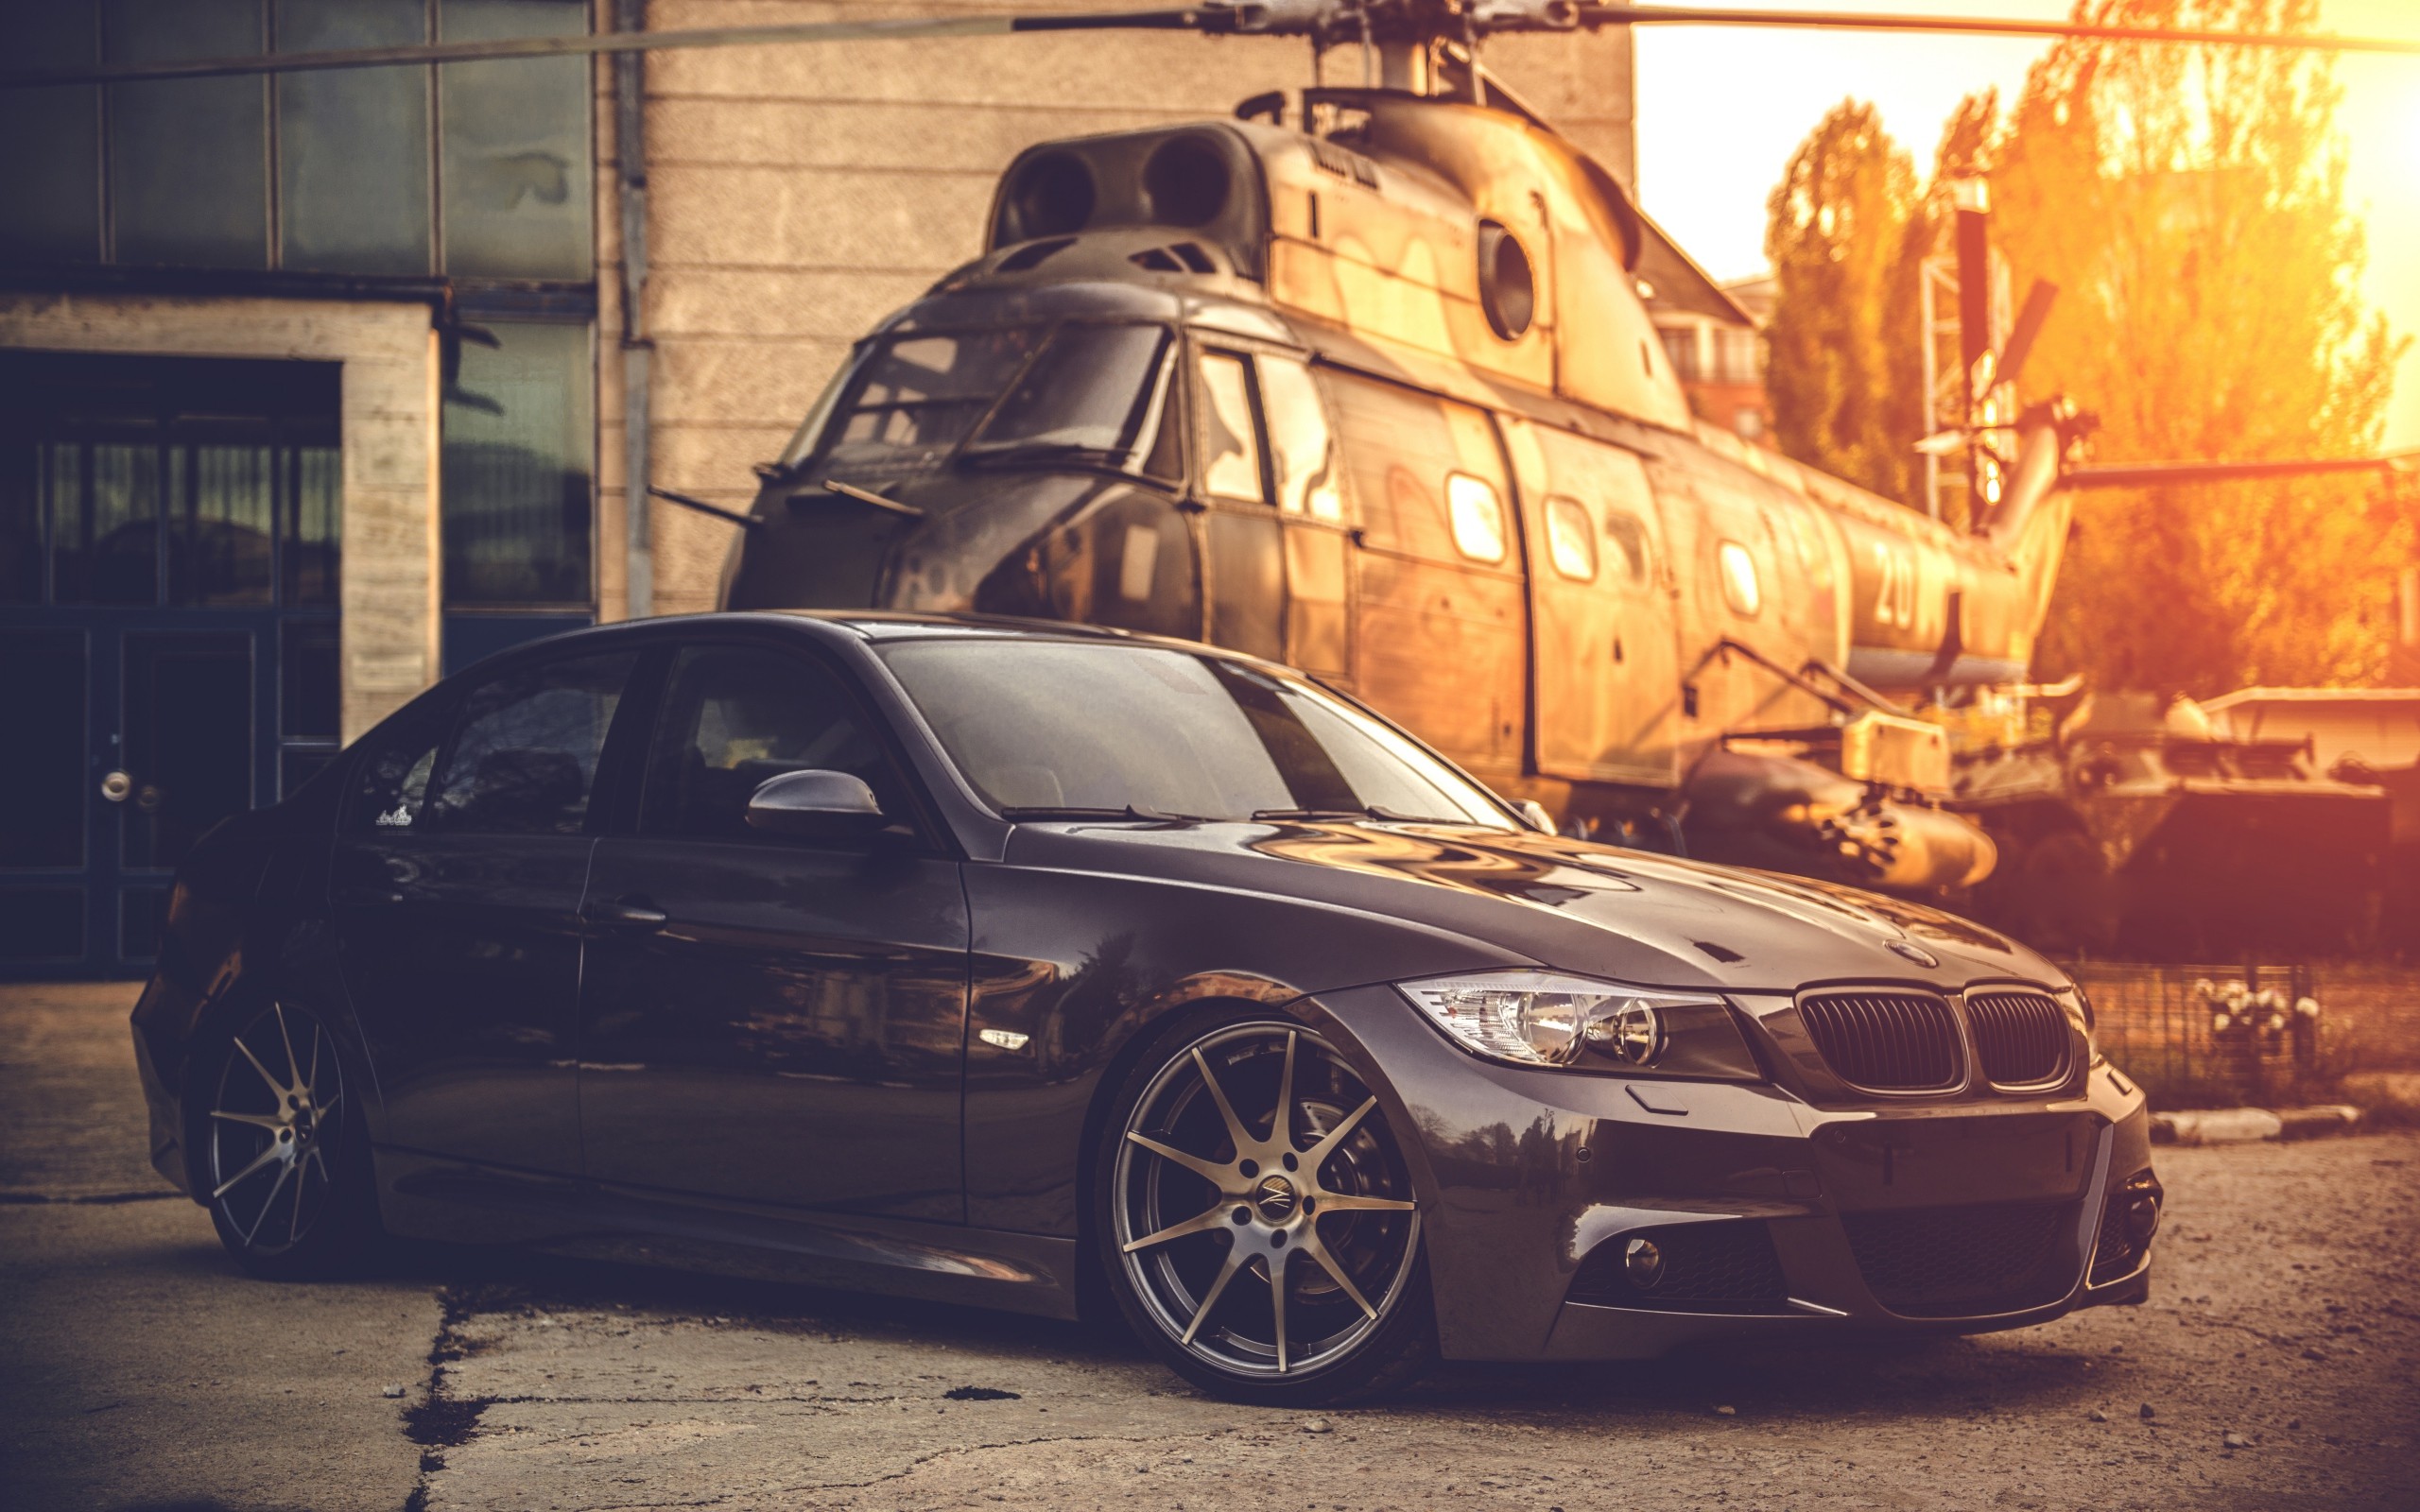 General 2560x1600 car sunset helicopters BMW E90 sunlight vehicle BMW 3 Series BMW German cars